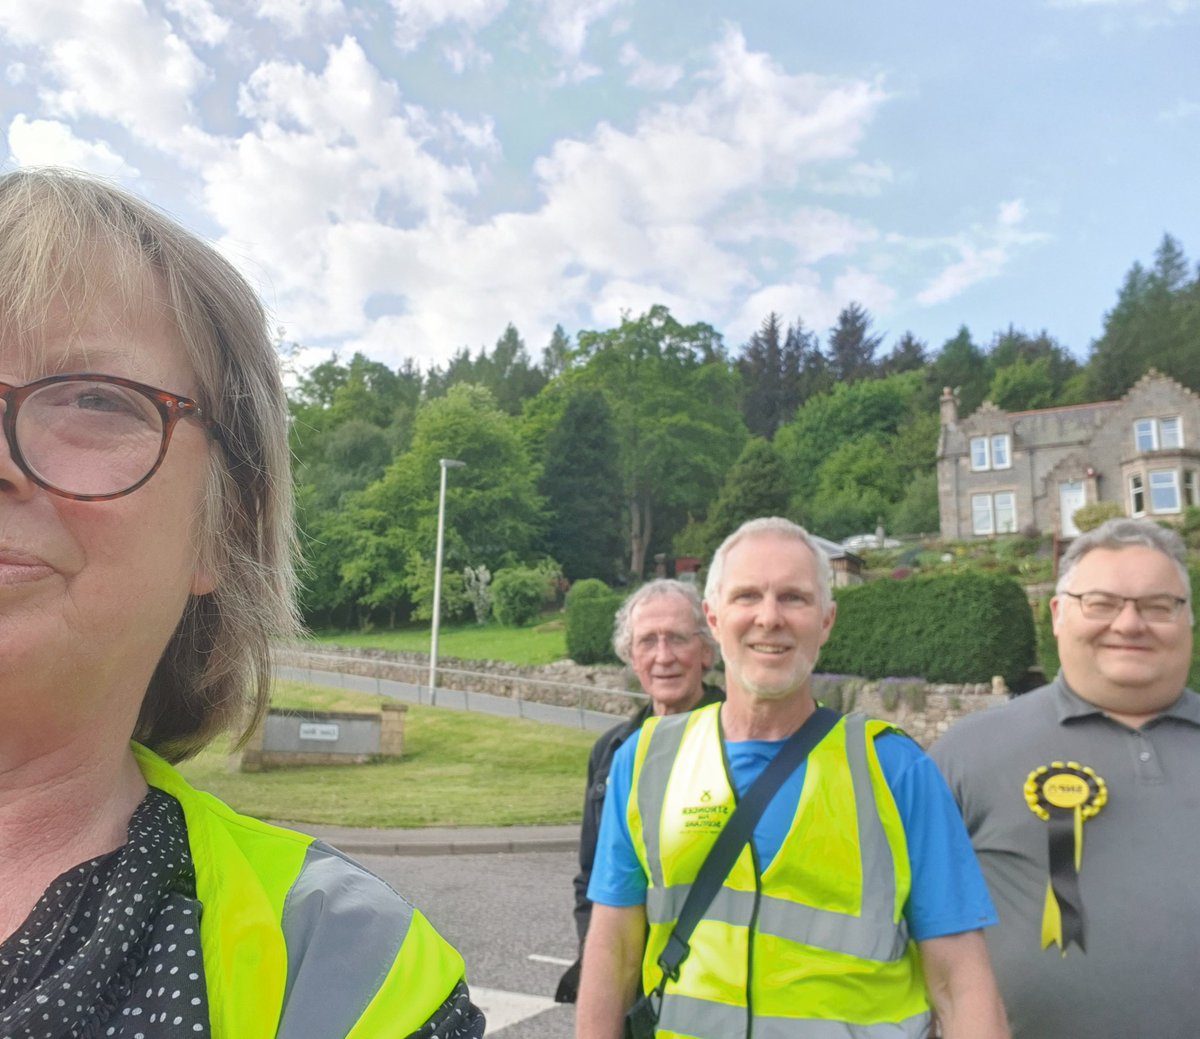 A fine few hours spent chatting on the doorsteps of Aberlour this evening. With our  candidate #VoteGrahamLeadbitter for #MorayWestNairnand Strathspey